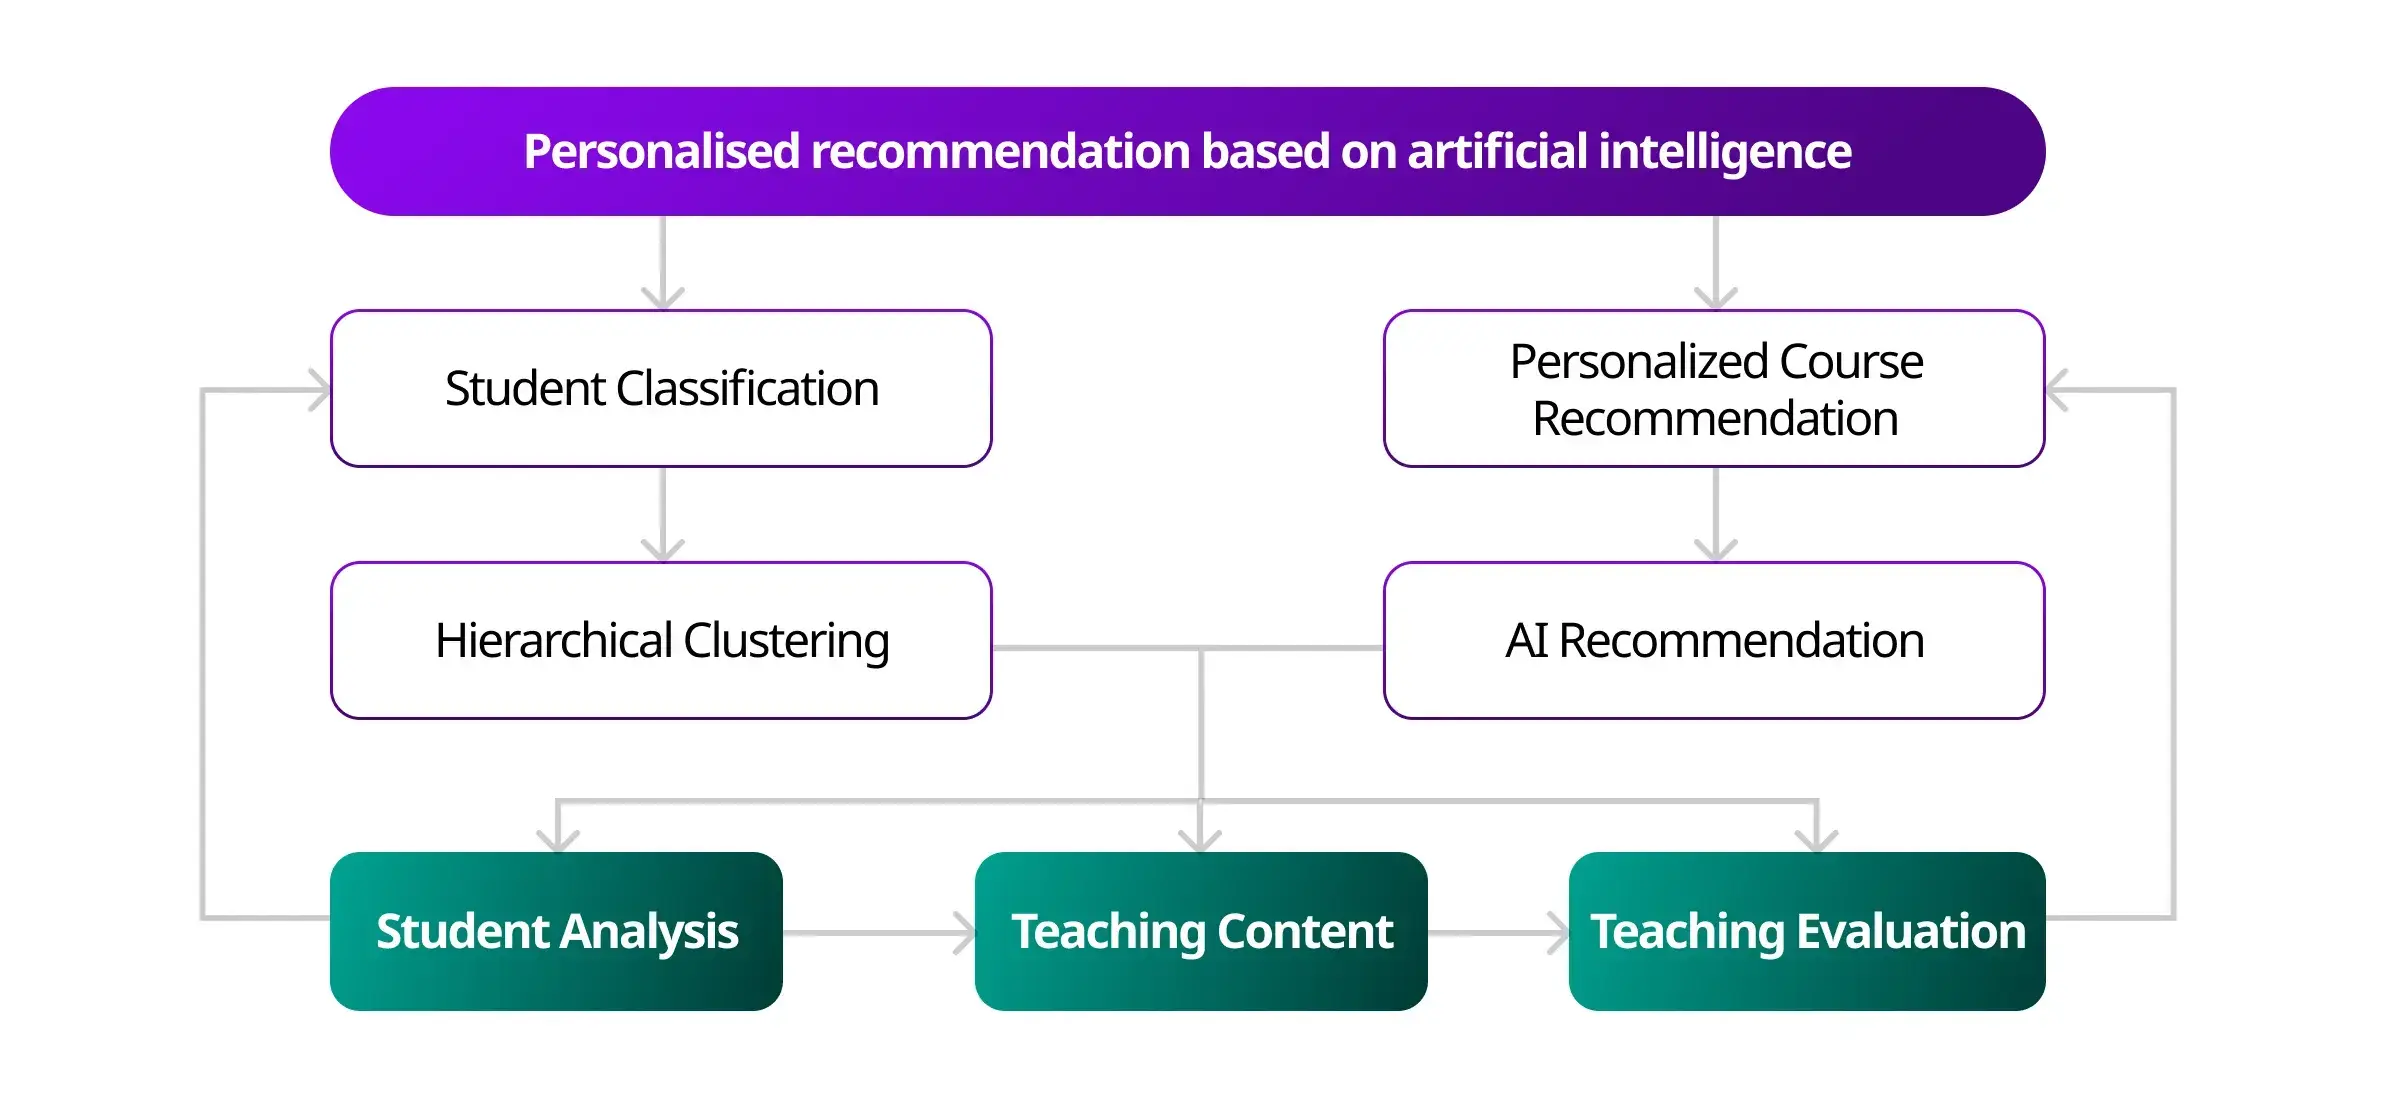 Personalized Education - Next-Generation AI Systems